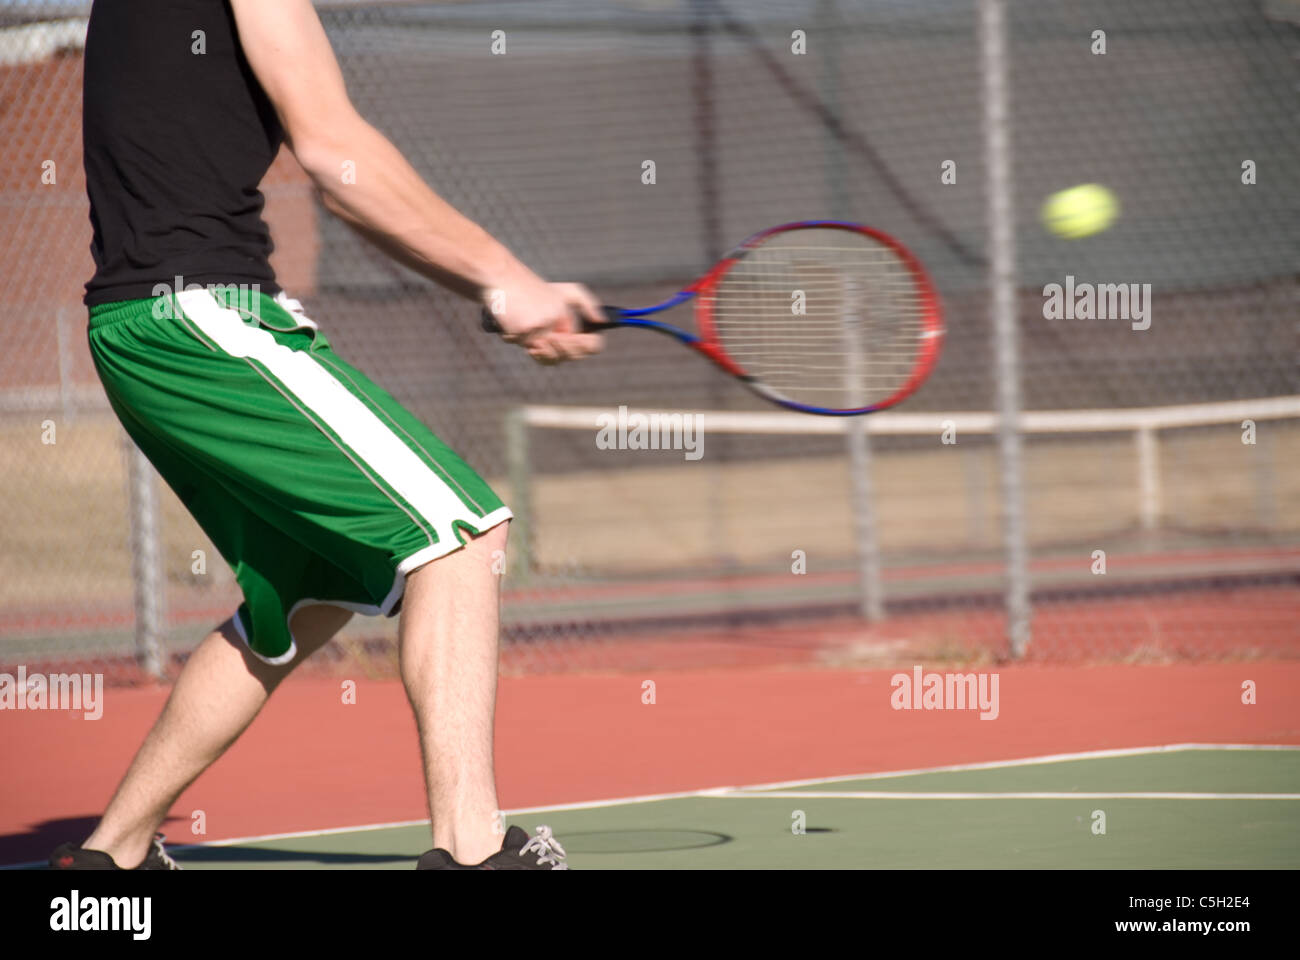 An image depicting the concept of tennis, including the court, racquets, balls and blue outdoors. Stock Photo